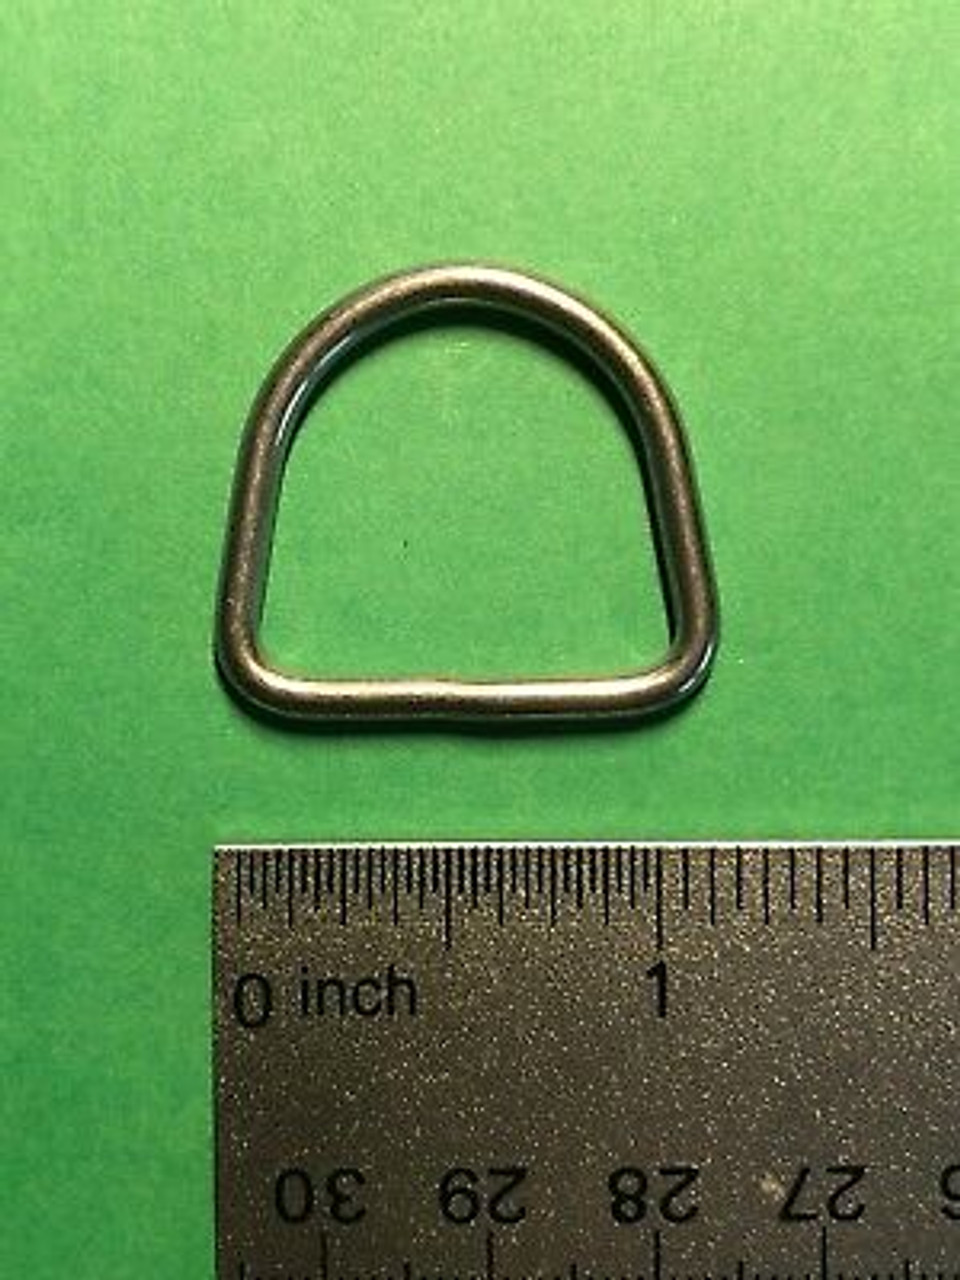 Stainless Steel 316 D Ring 1/8 x 1 (3mm x 25mm) Marine Grade - US  Stainless